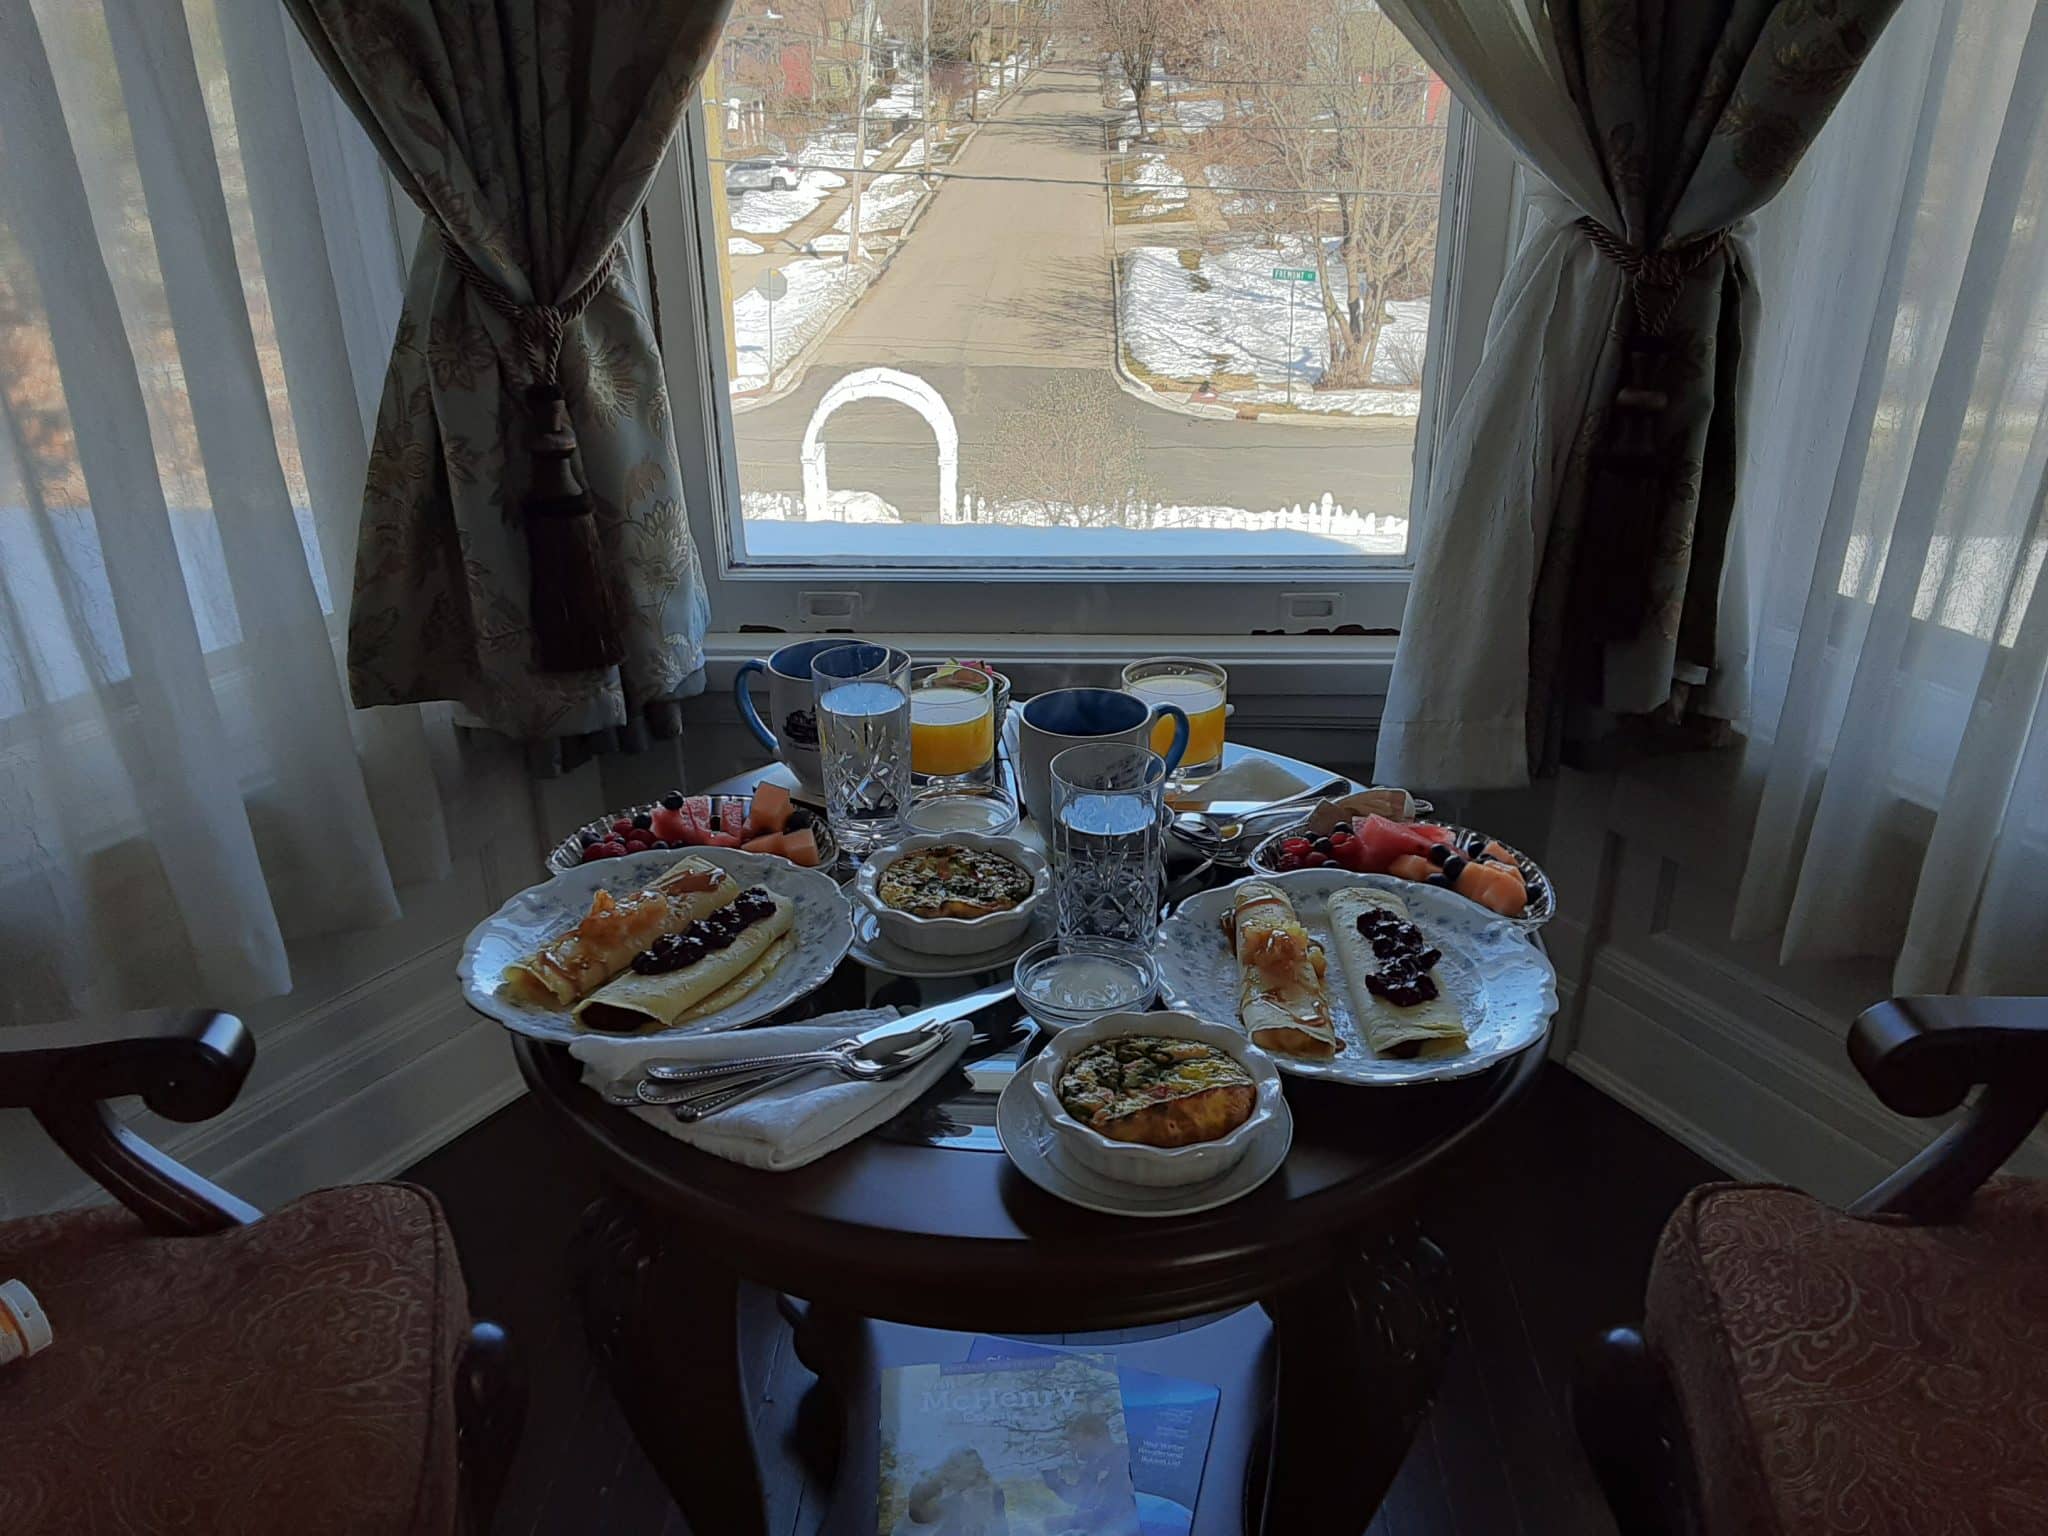 table setup in front of window with breakfast for two covering the top of it and two chairs at the table